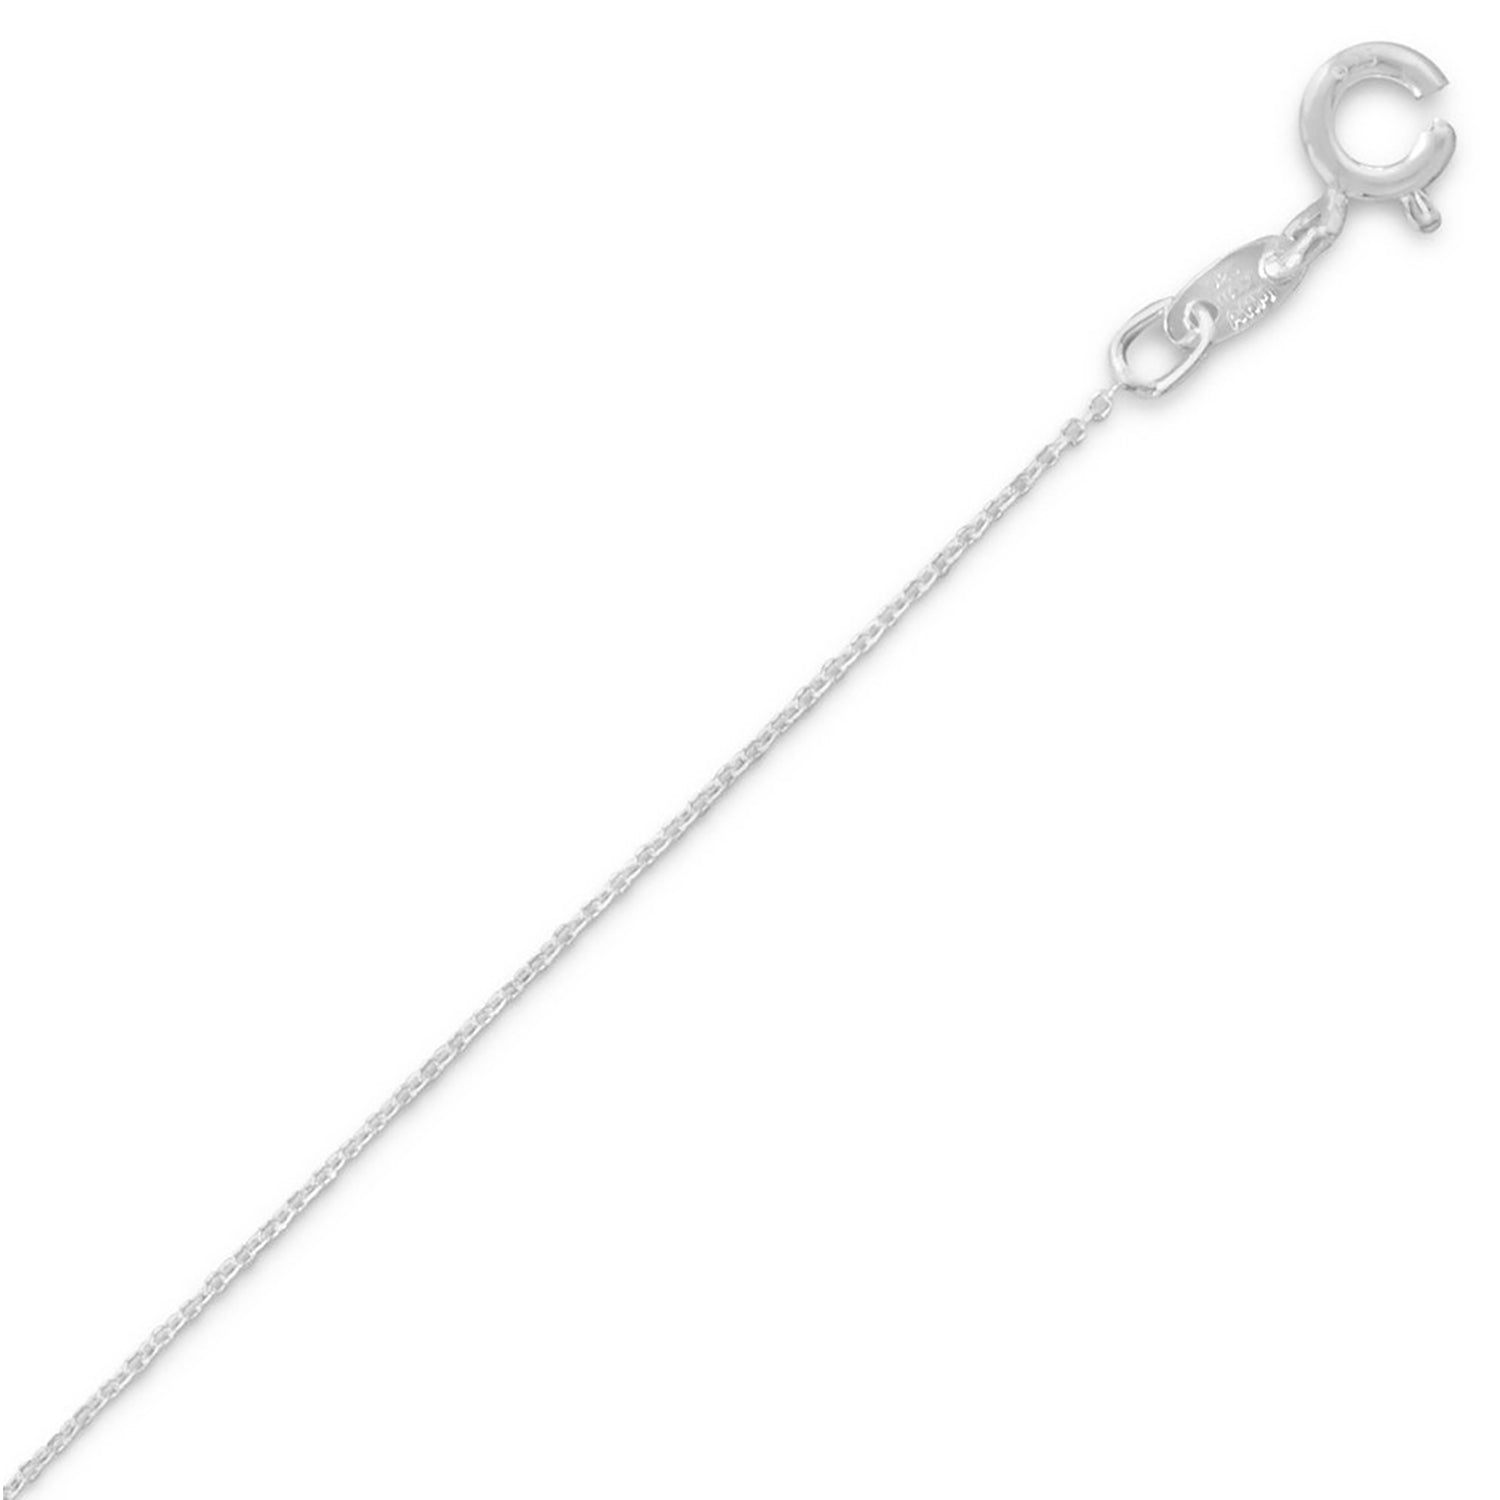 Cable Chain - 0.6mm